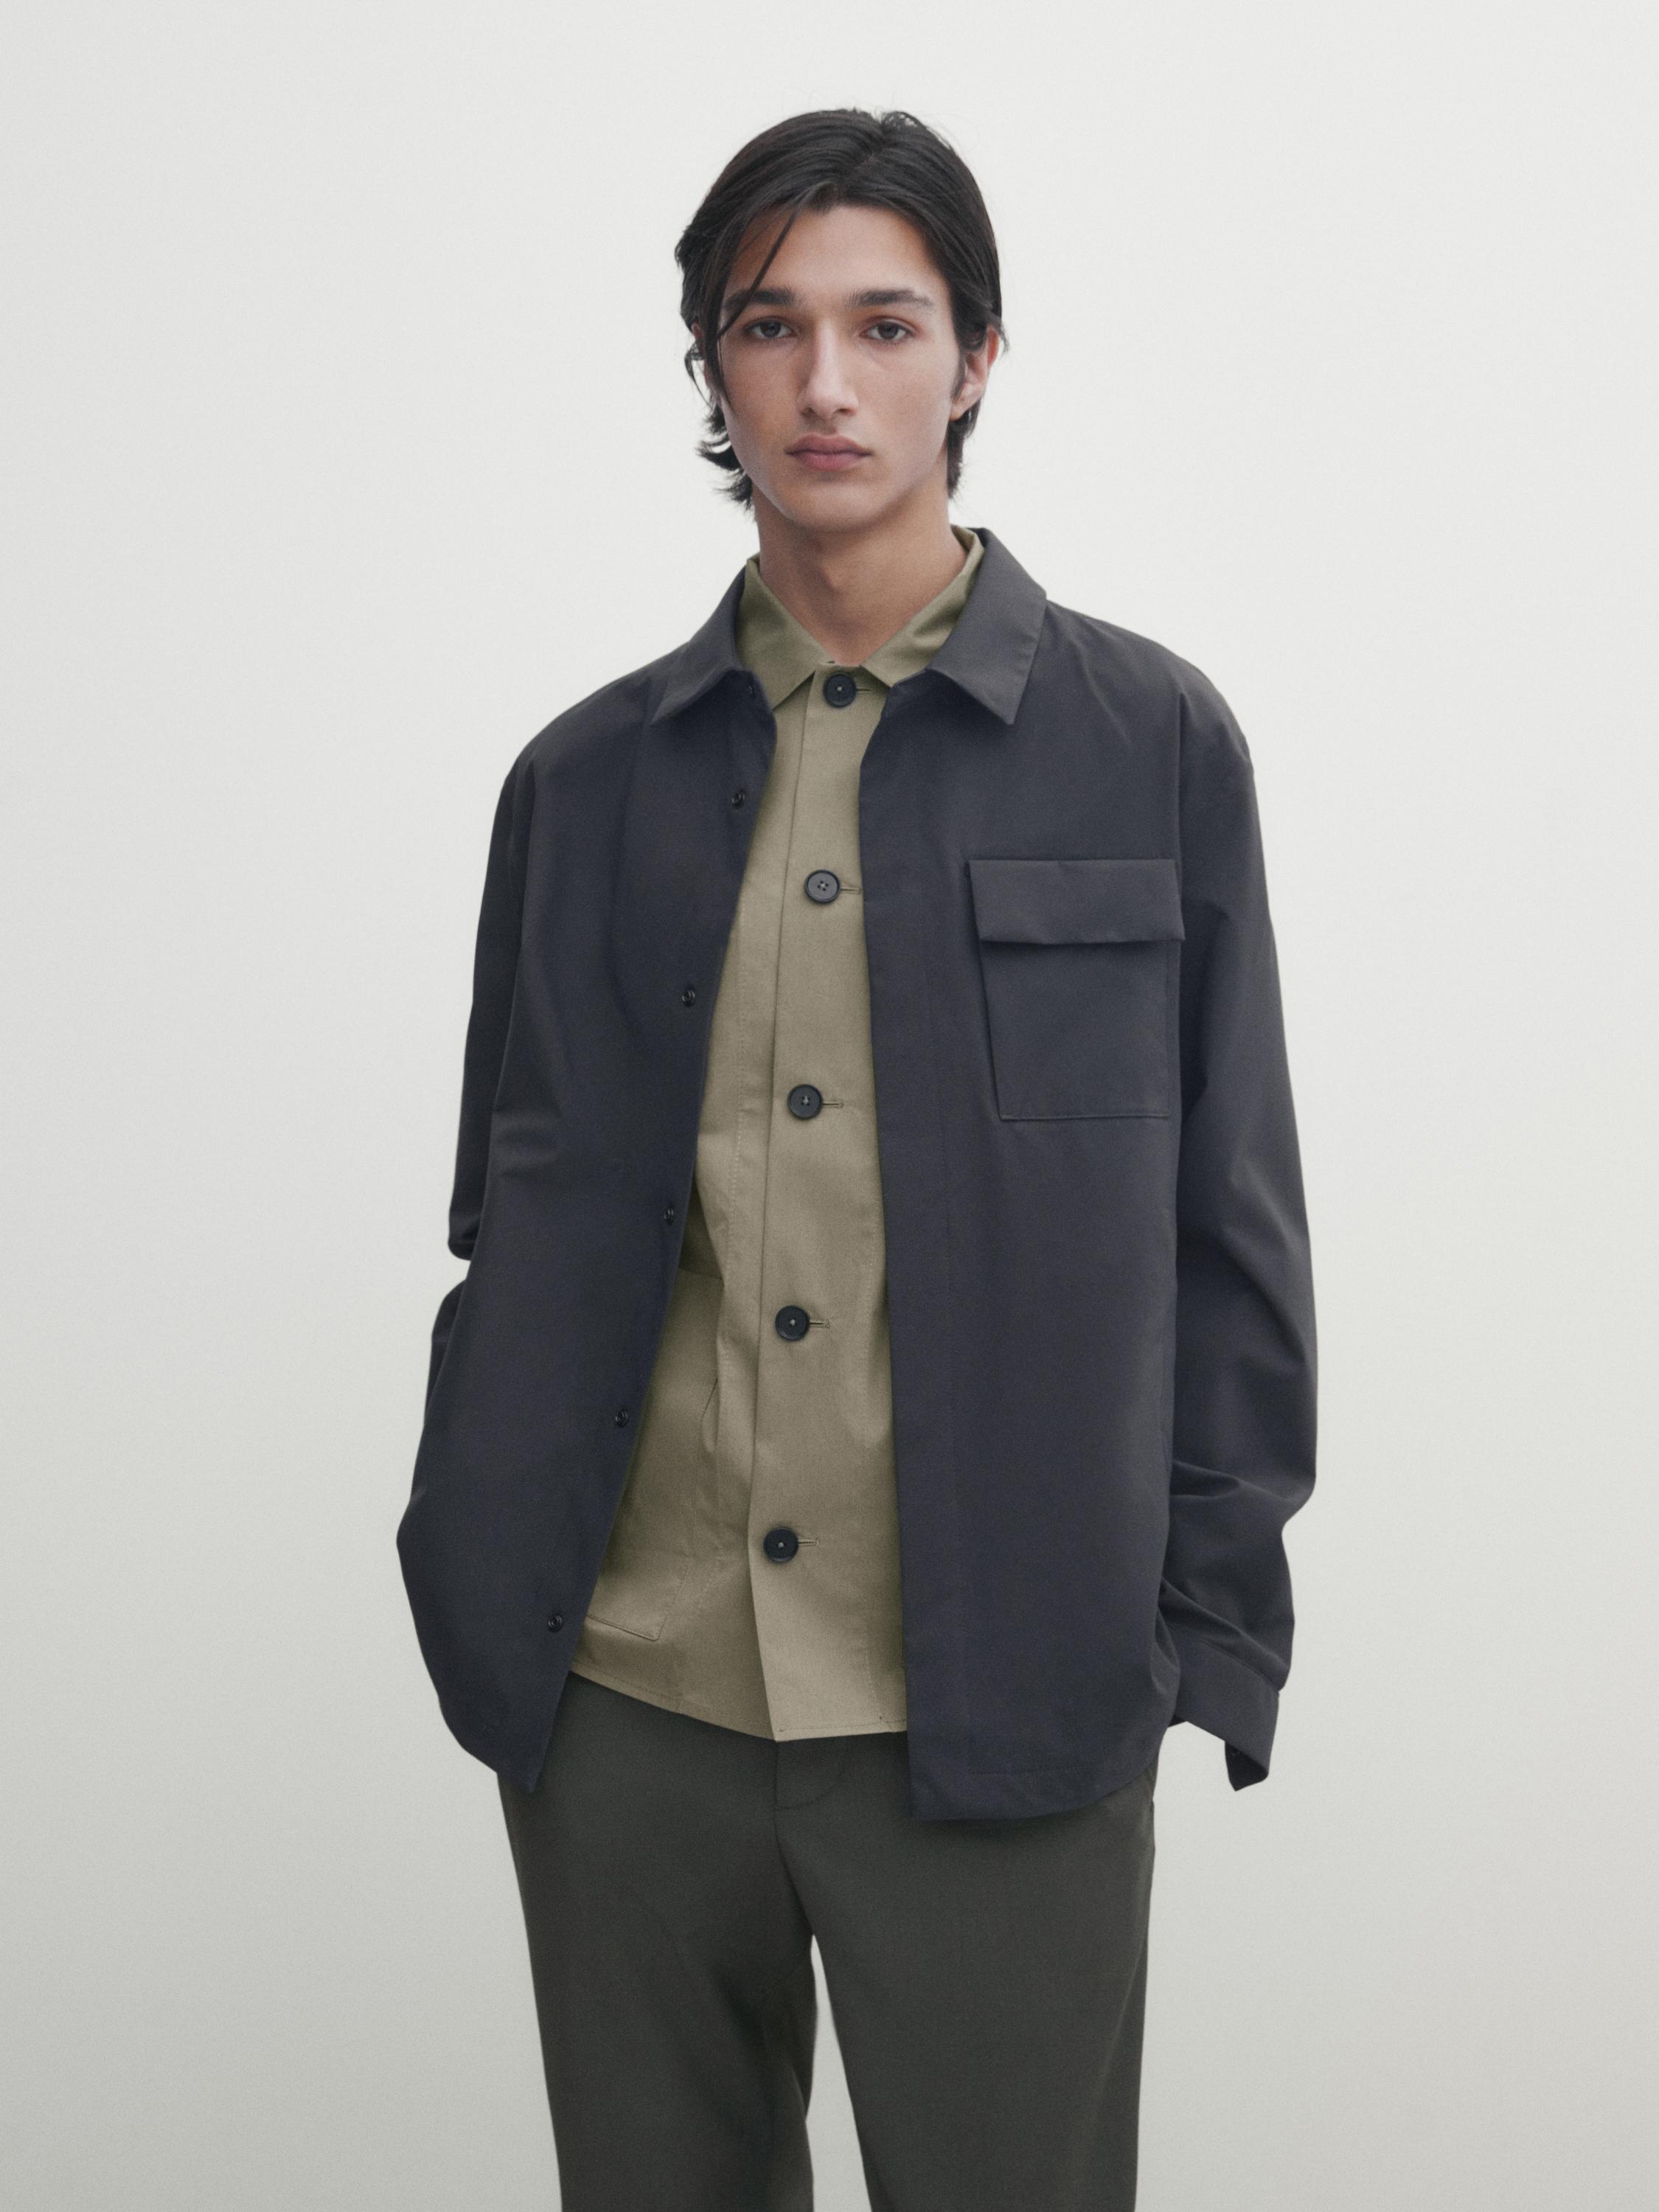 2-in-1 technical jacket - Anthracite grey | ZARA United States